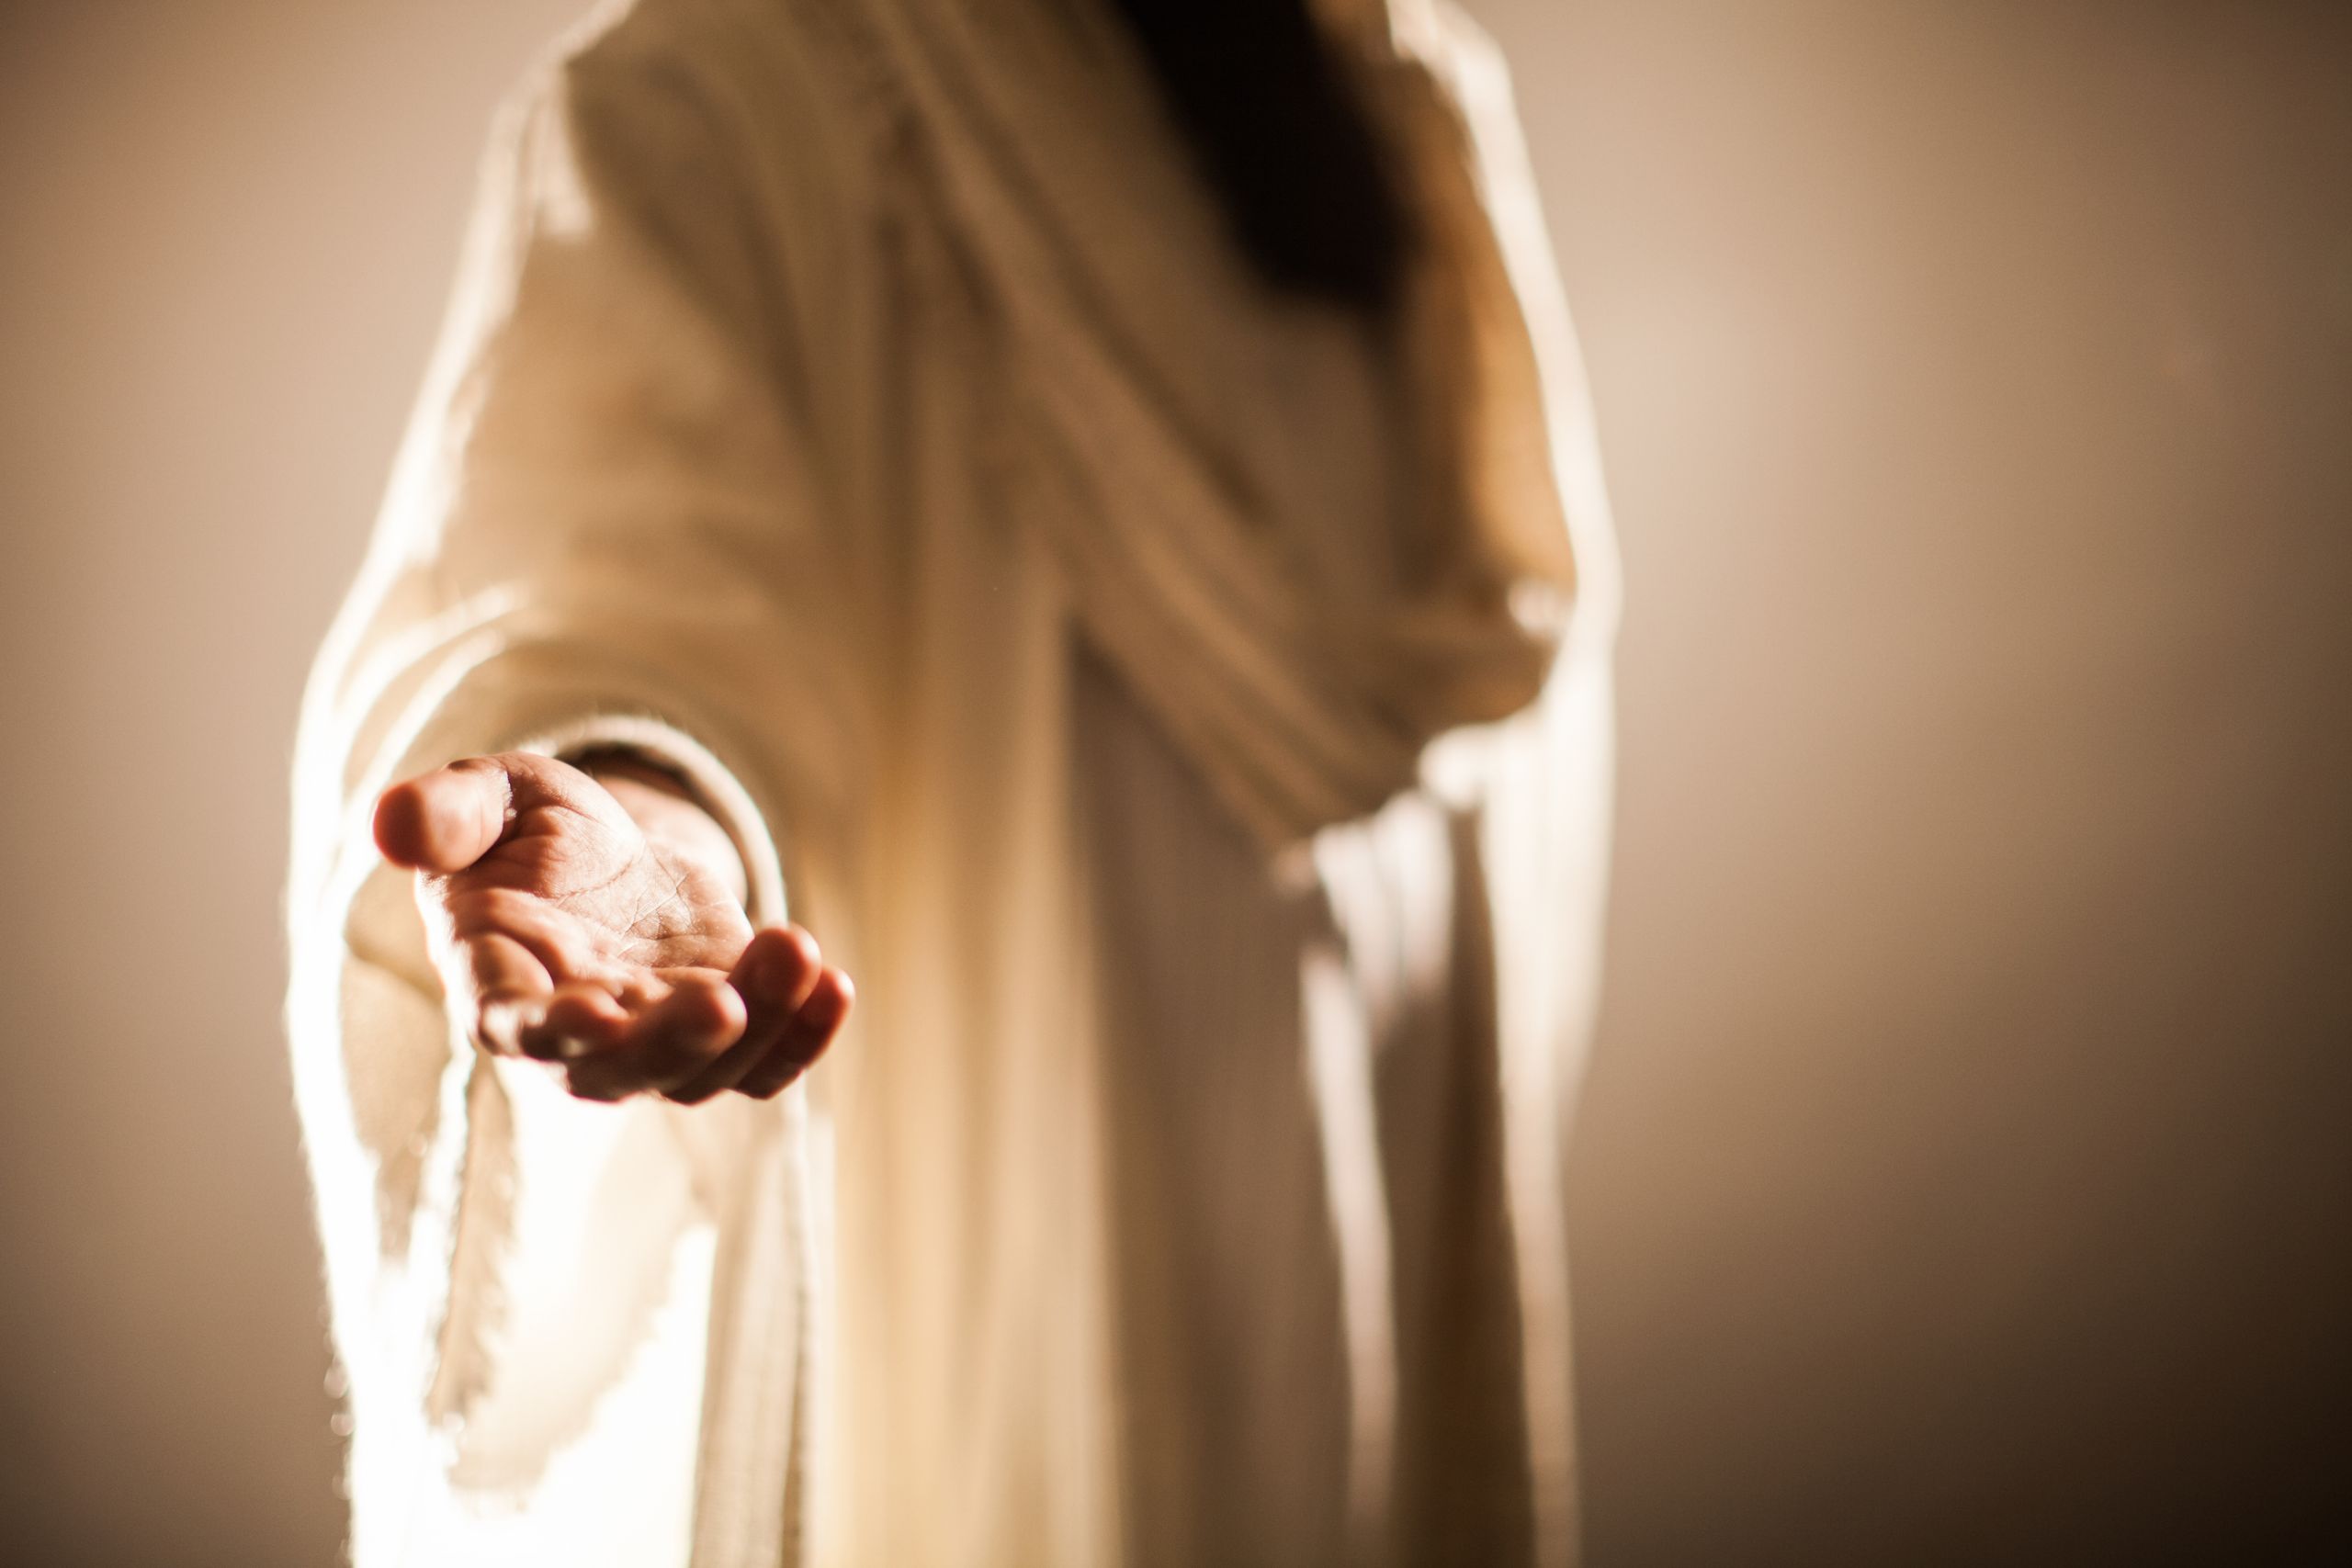 Jesus is dressed in a white robe extending His hand out to you.